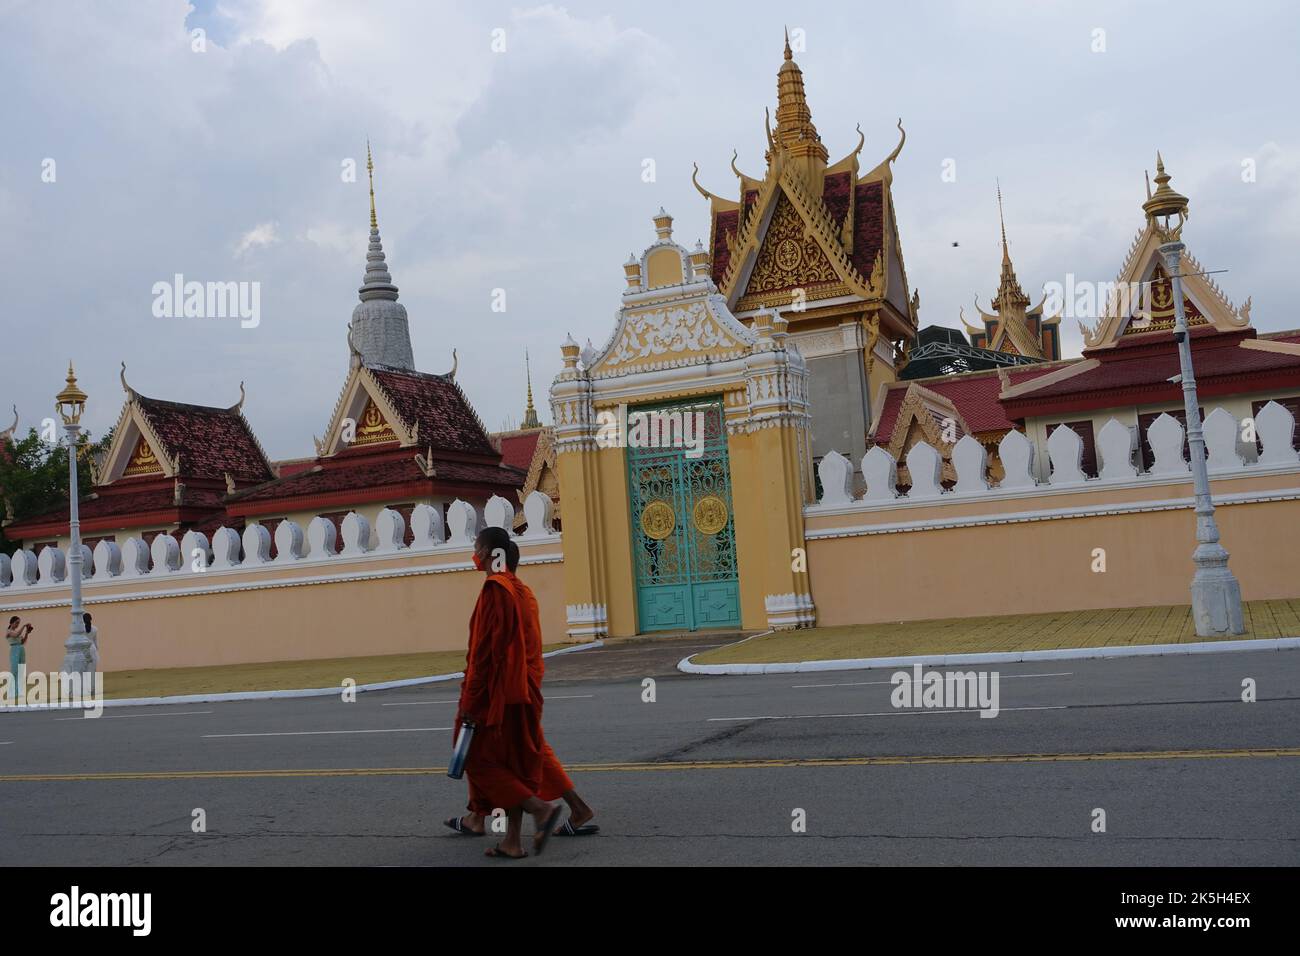 The palace of King Norodom Sihamoni in the center of Phnom Penh Stock Photo